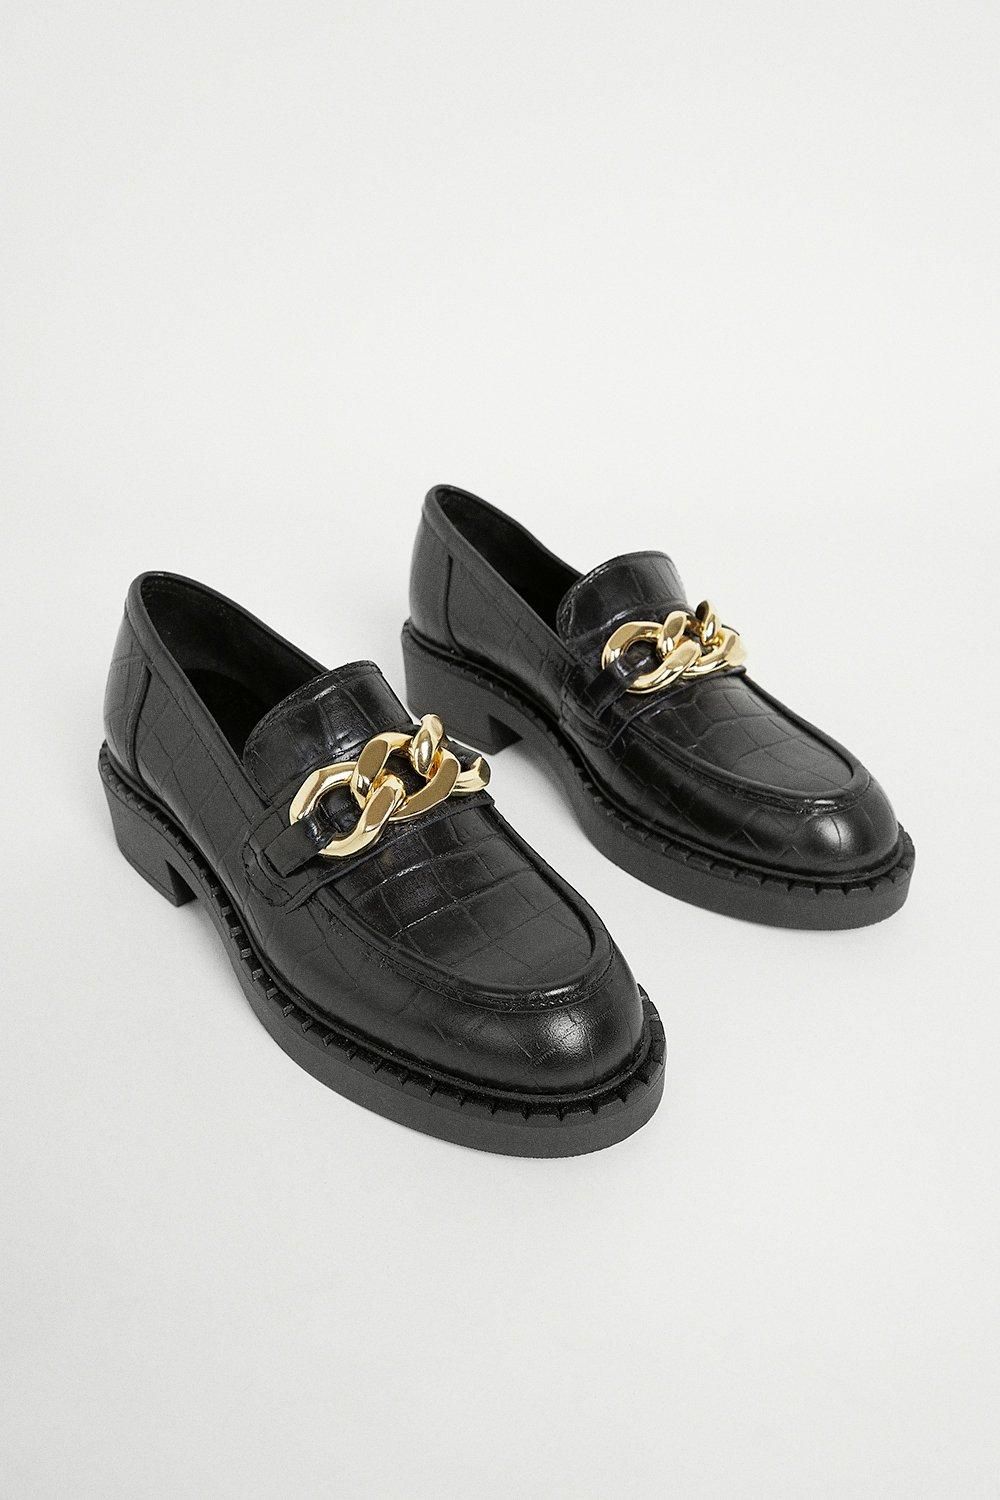 Real Leather Croc Chunky Loafer | Warehouse UK & IE